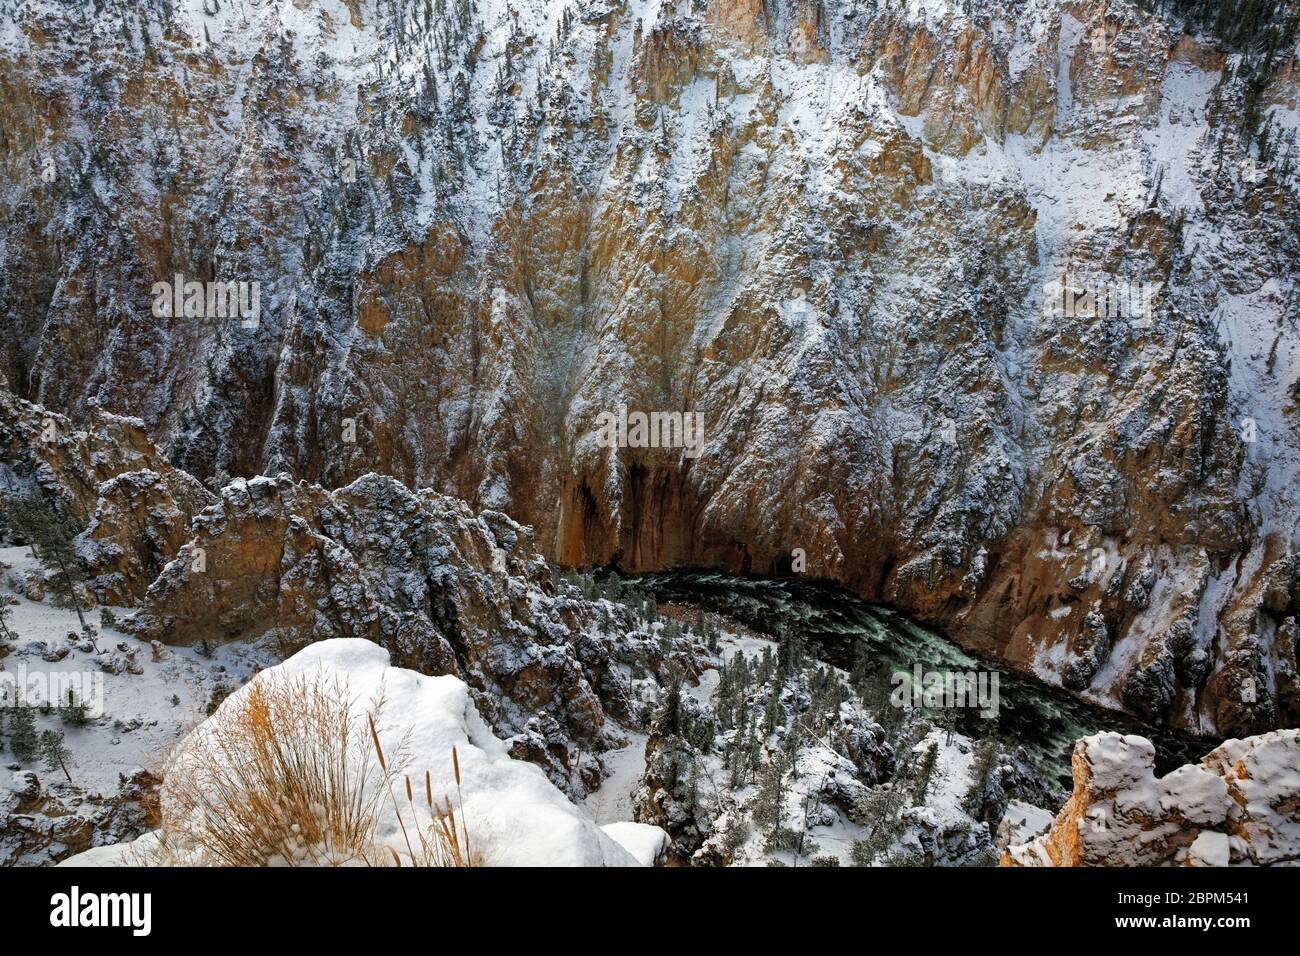 WY04404-00...WYOMING - Colorful rocks and fins along the walls of the Grand Canyon of the Yellowstone River in Yellowstone National Park. Stock Photo